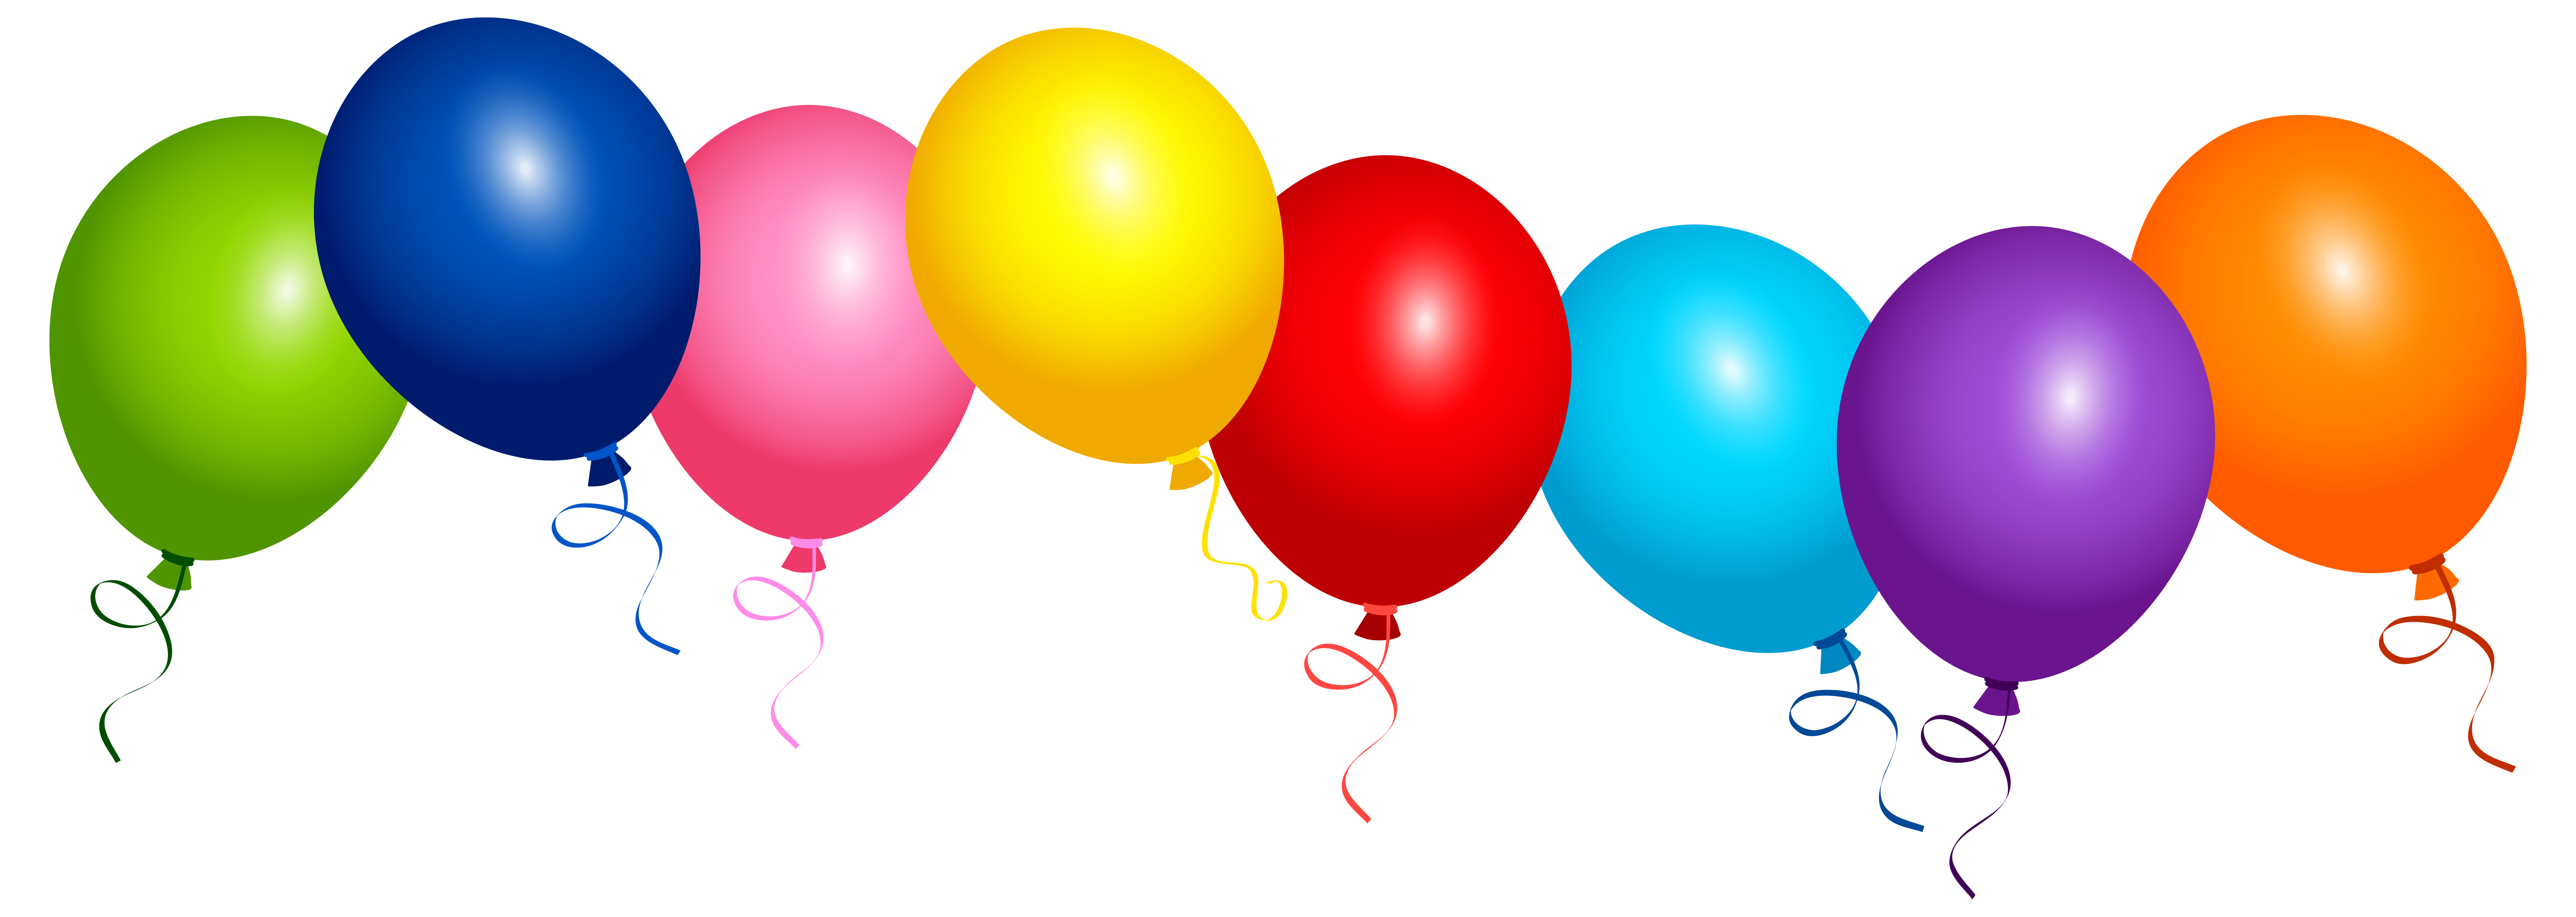 Of Balloons Colorful Bunch Free HD Image PNG Image